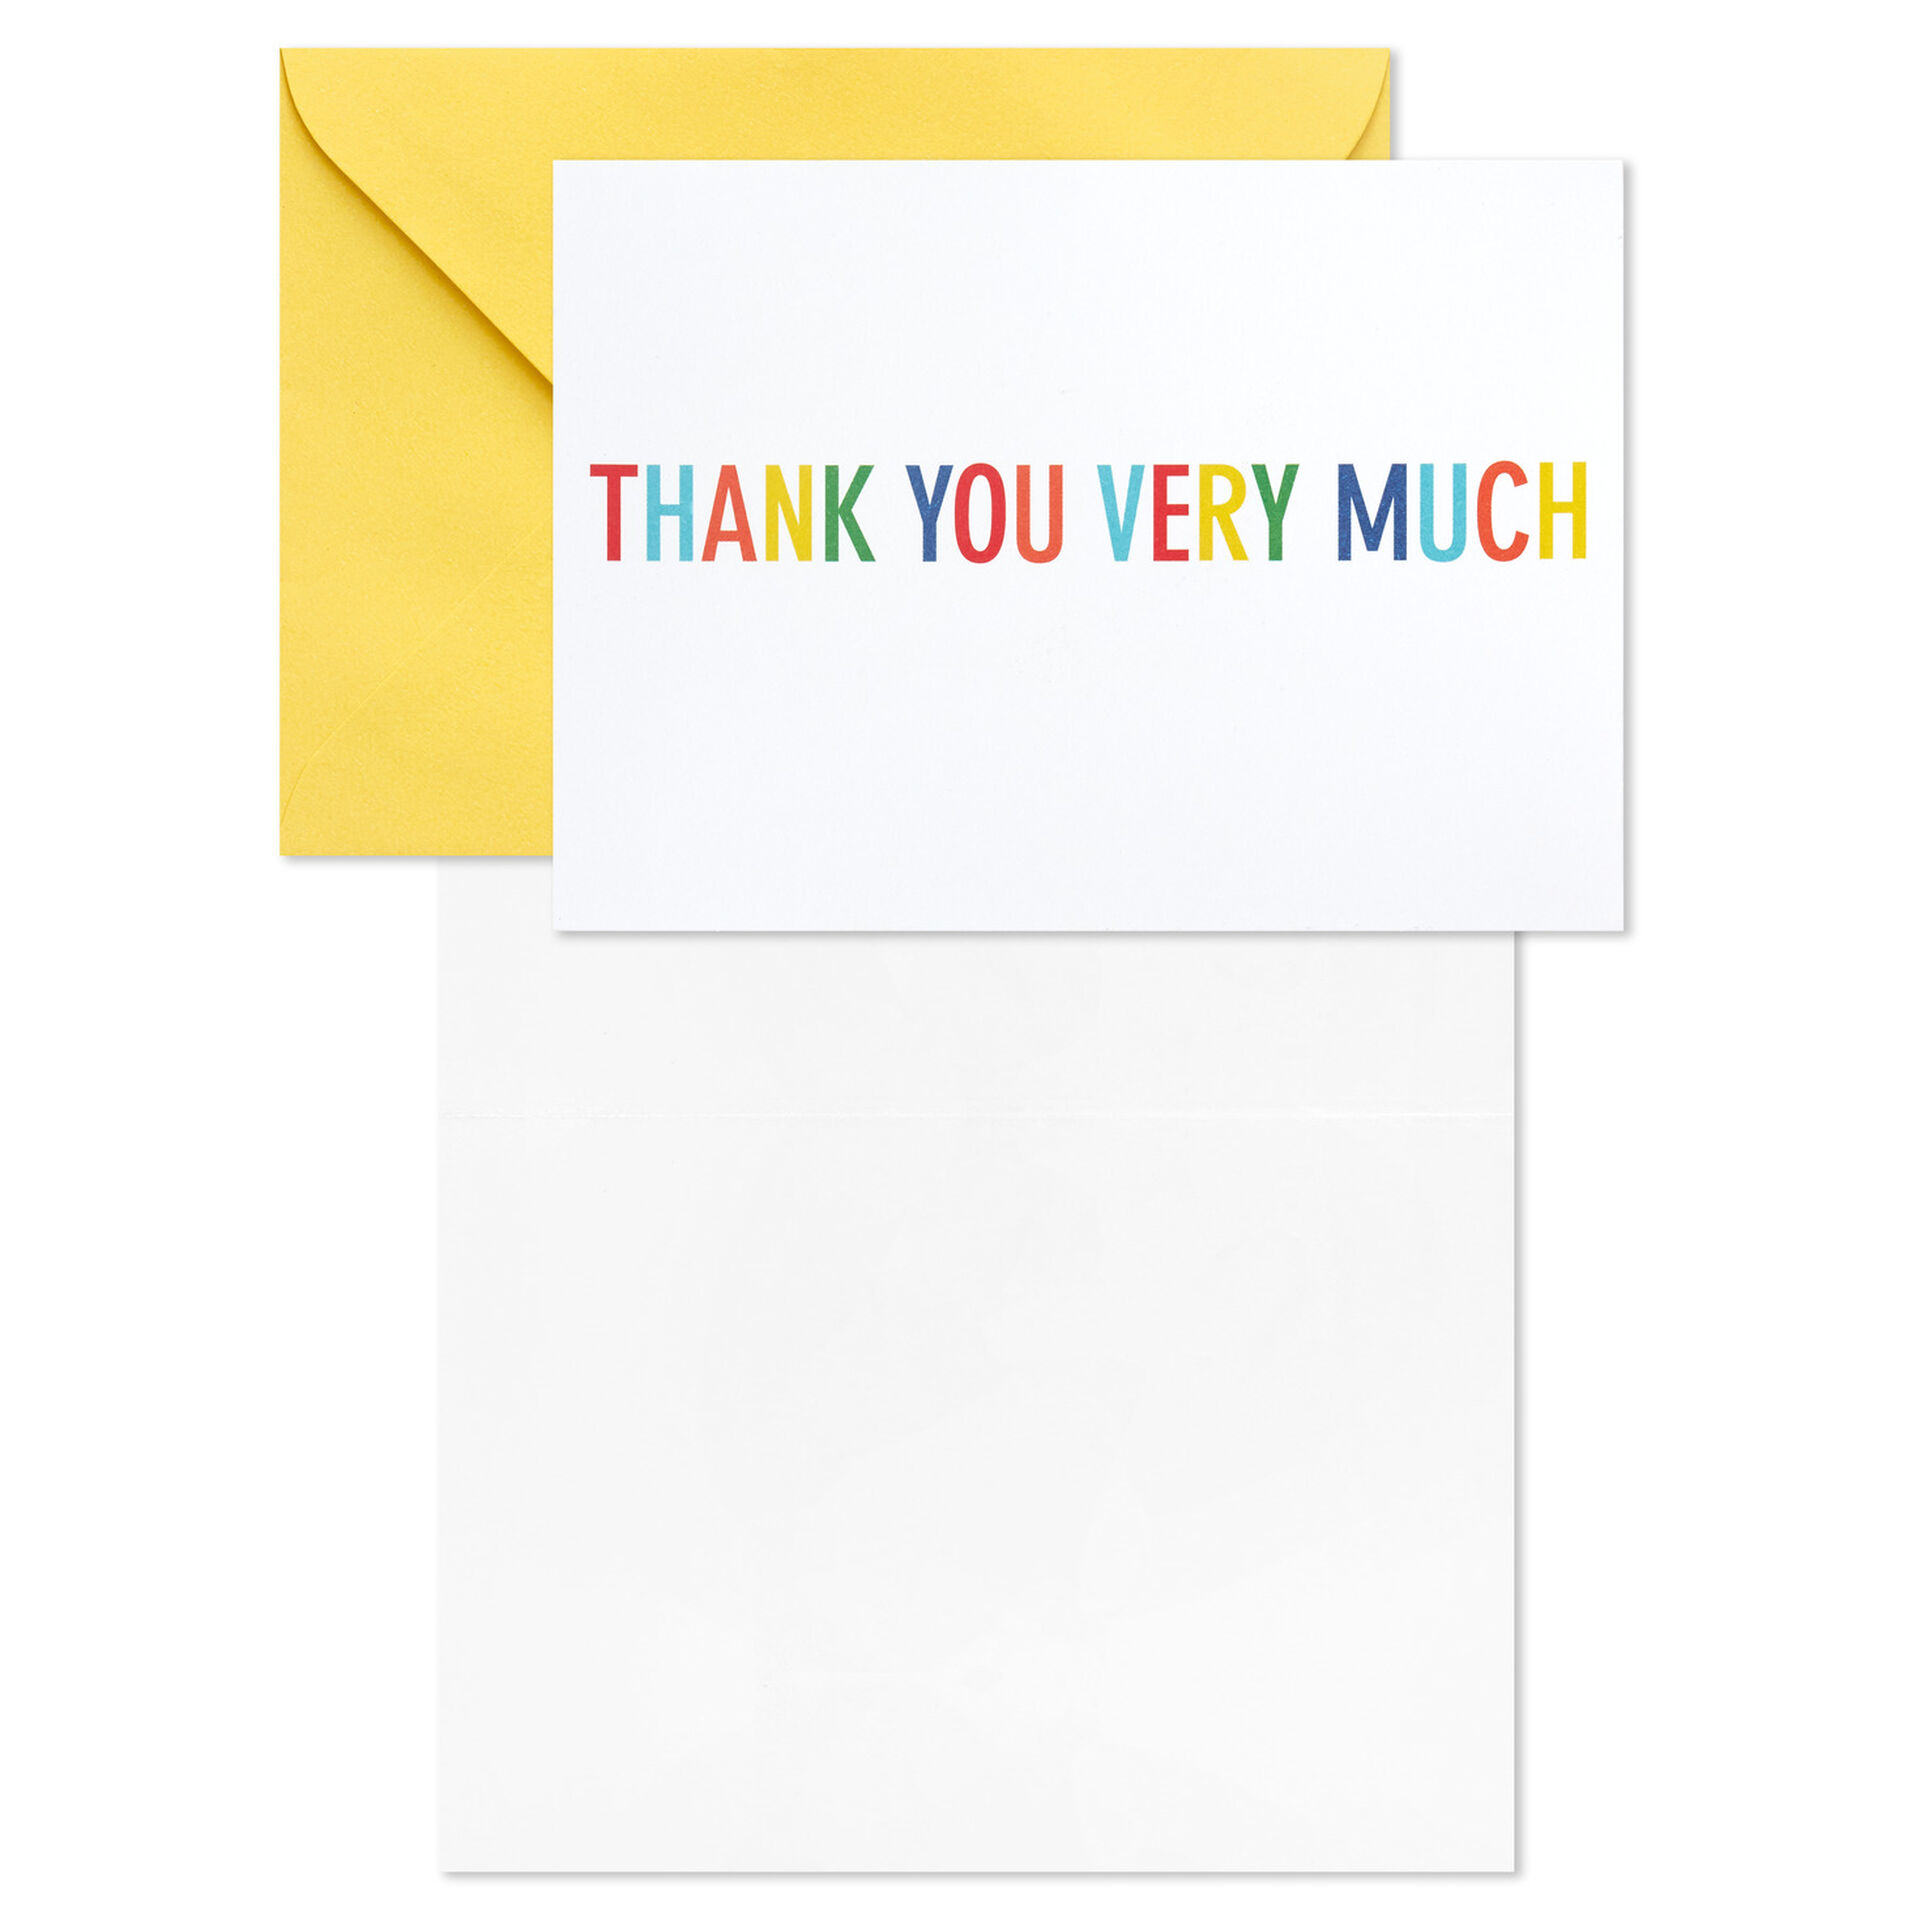 Primary-Colors-Blank-ThankYou-Notes-Assortment-Pack_5STZ1057_03